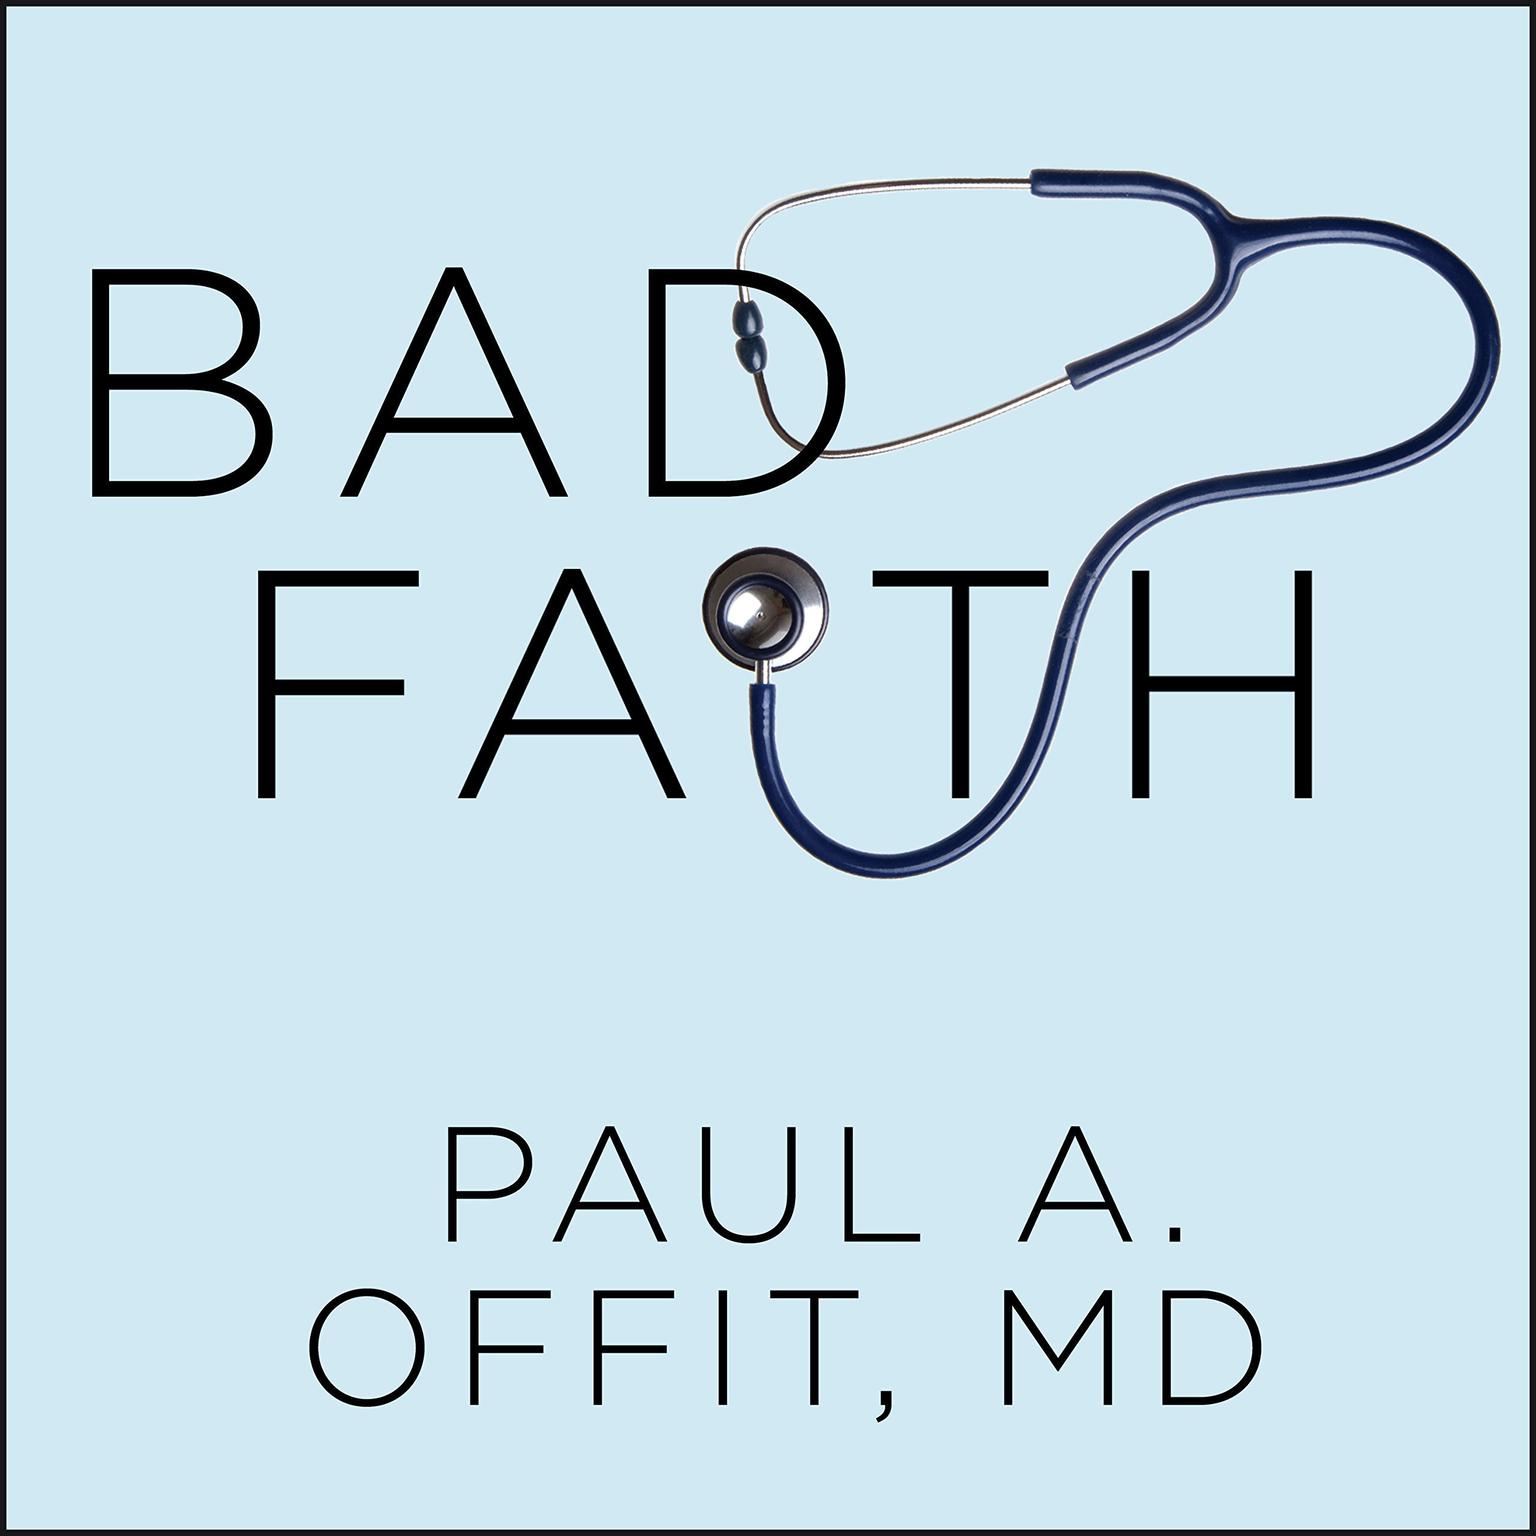 Bad Faith: When Religious Belief Undermines Modern Medicine Audiobook, by Paul A.  Offit